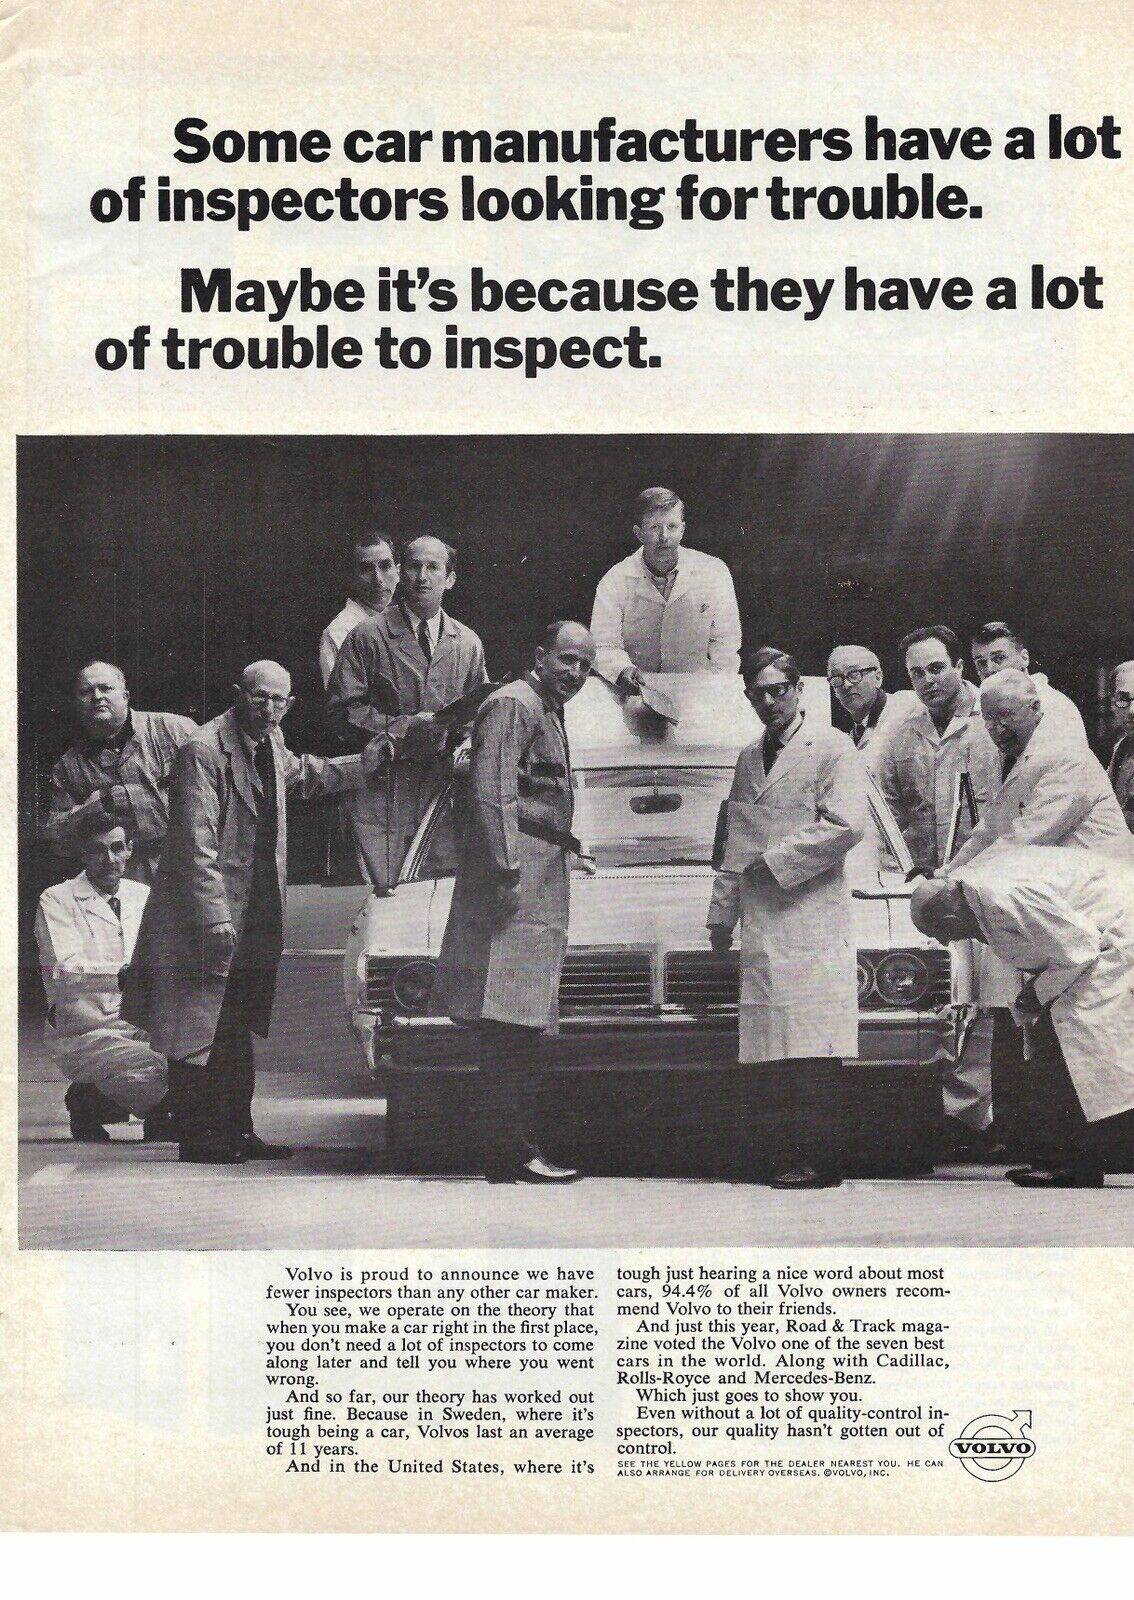 1967 Volvo Car Inspectors looking for Trouble Vintage Magazine Print Ad/Poster